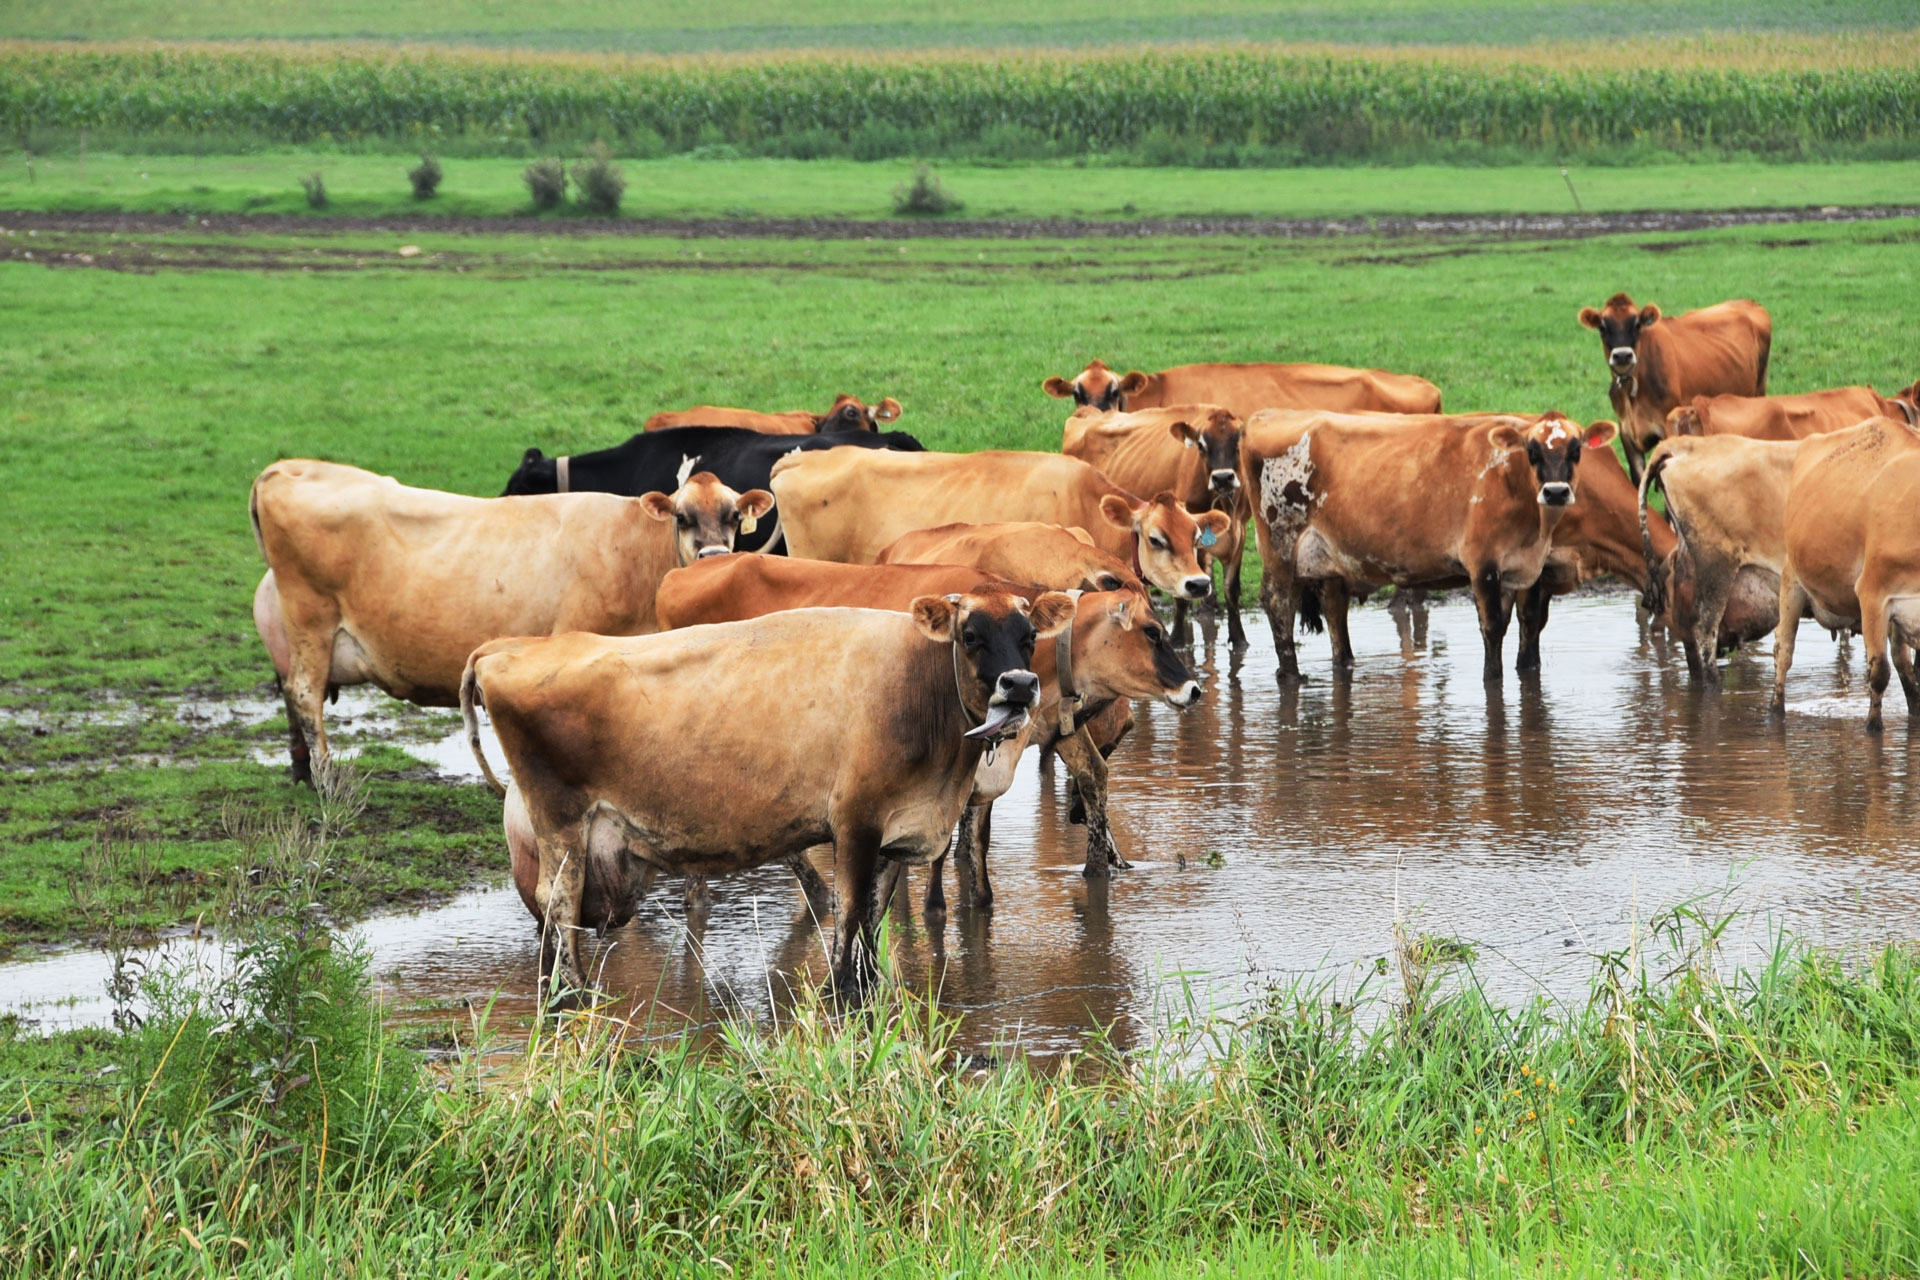 Cows in water